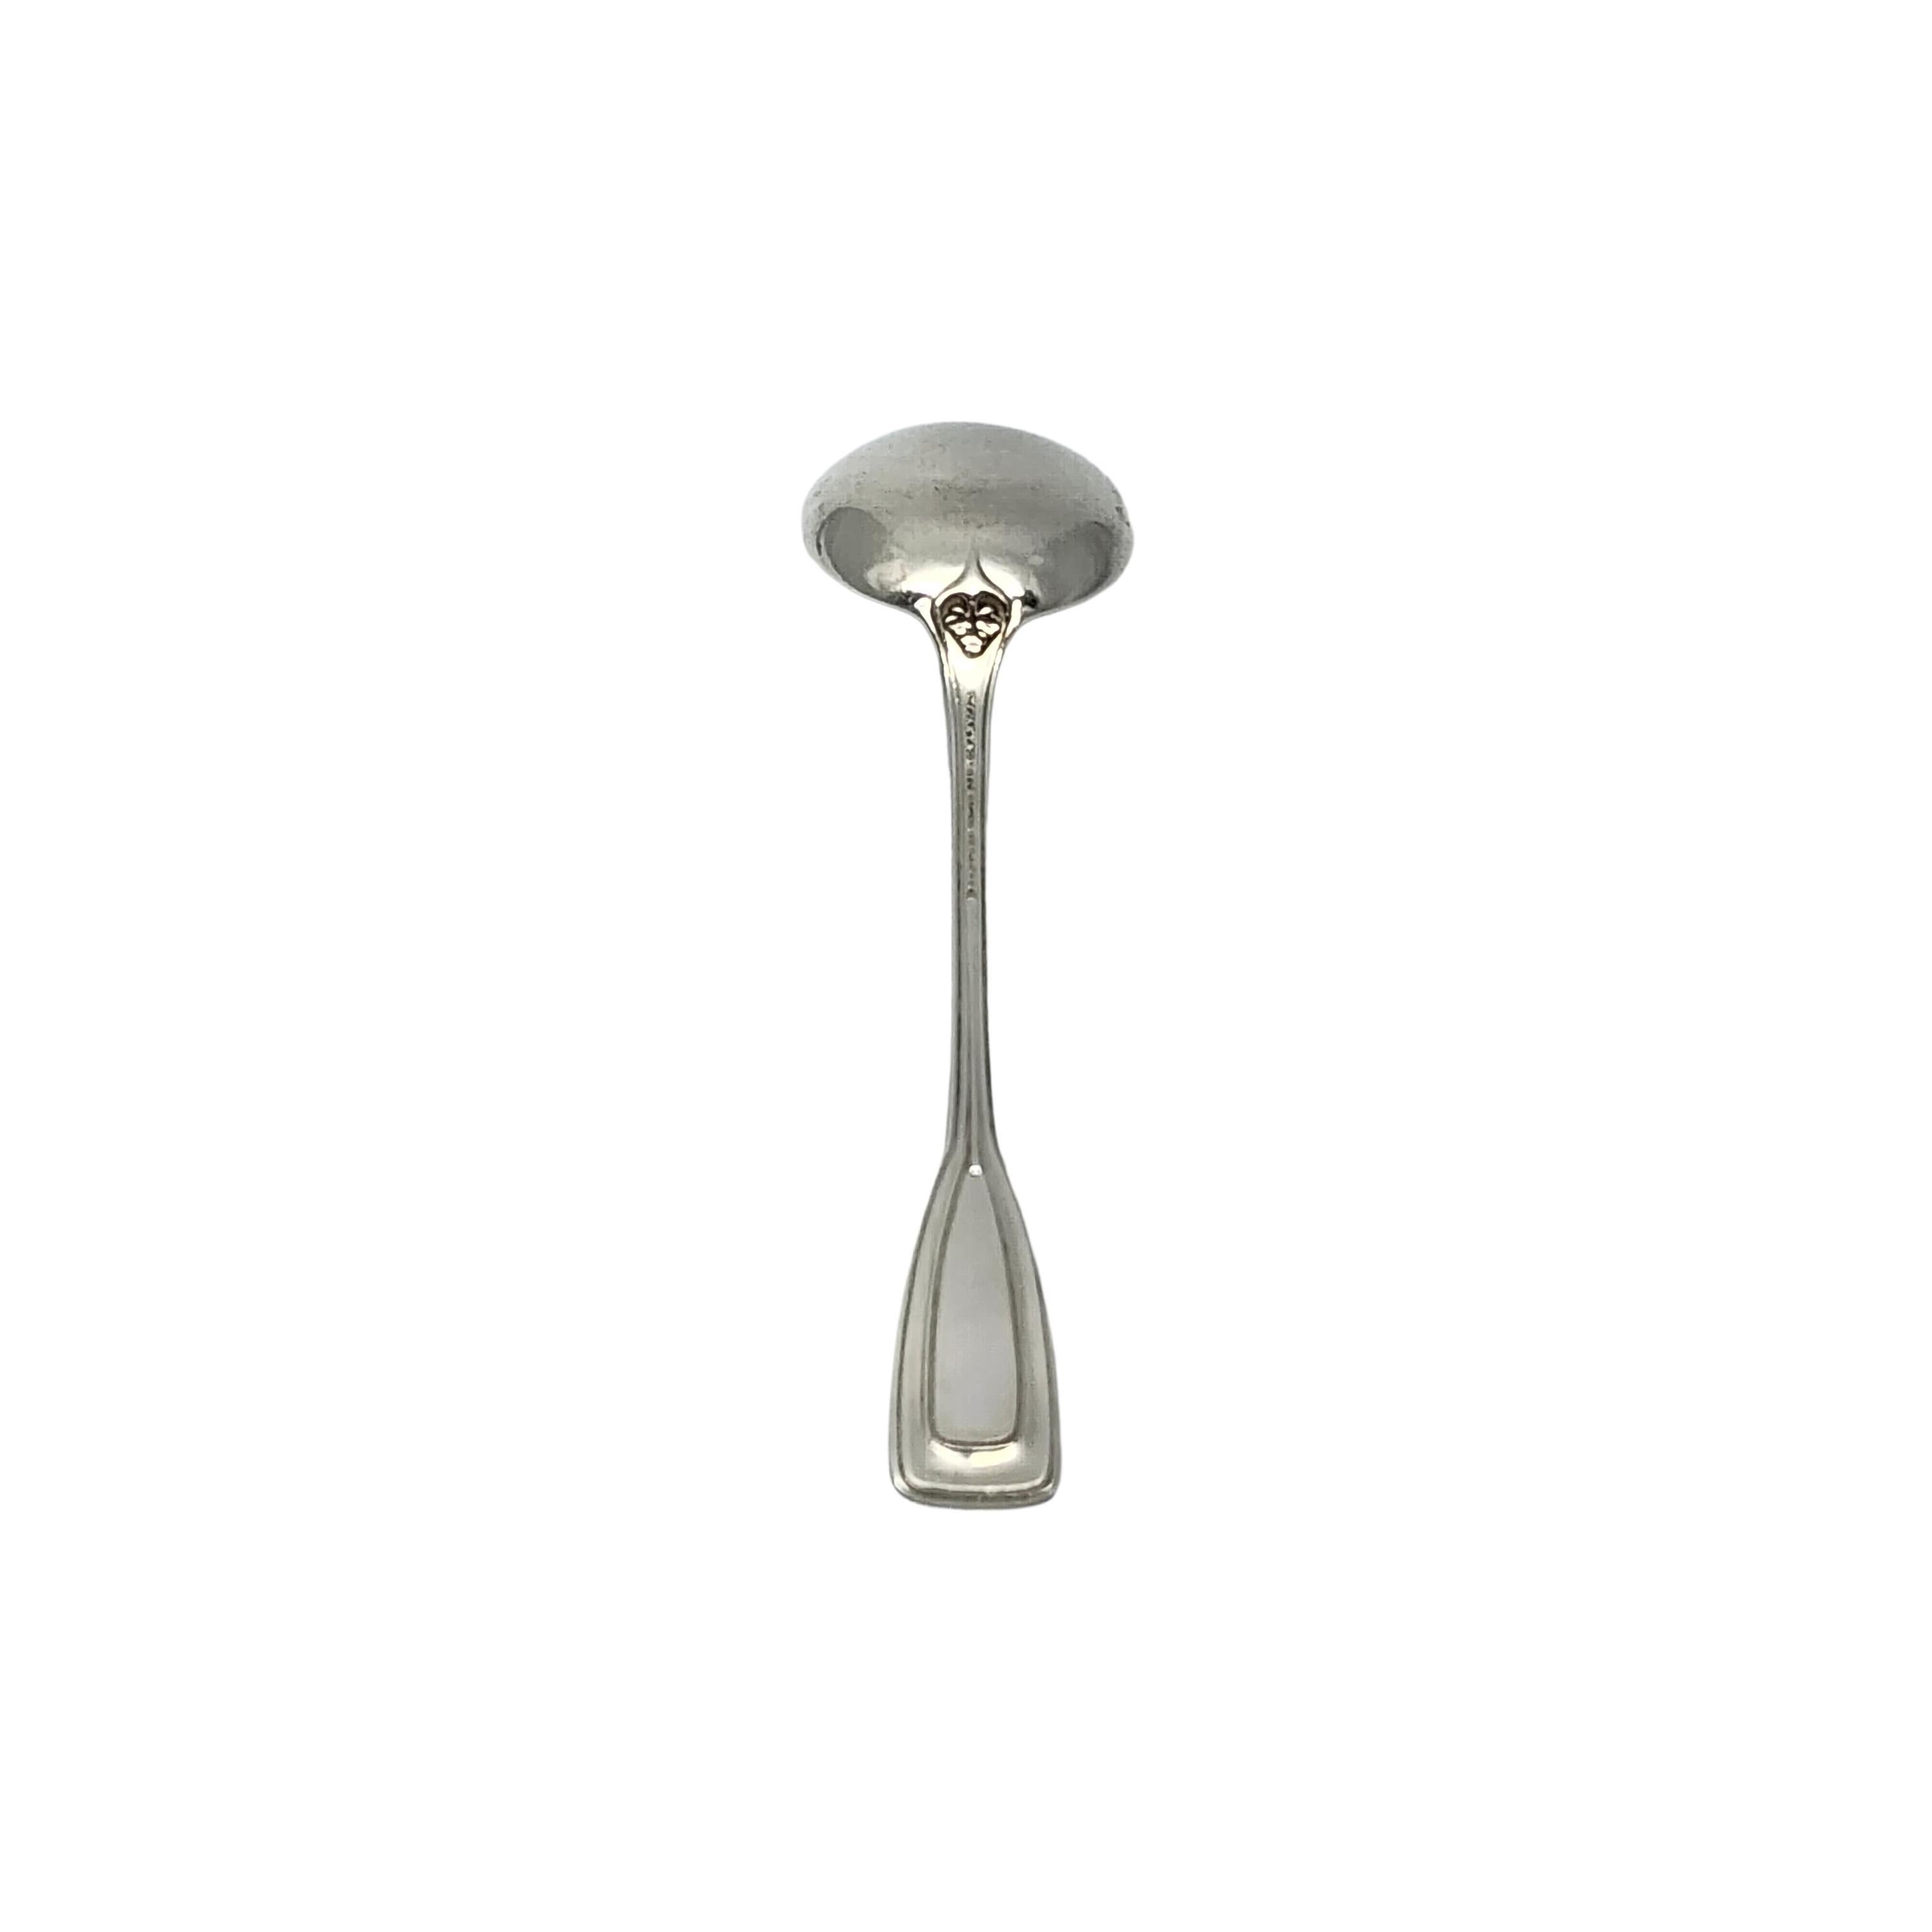 Sterling silver round bowl bouillon soup spoon by Tiffany & Co in the St. Dunstan pattern with monogram.

Monogram appears to be W

Designed by Albert A. Southwick in 1909 and named for the patron saint of gold and silversmiths, Tiffany's St.